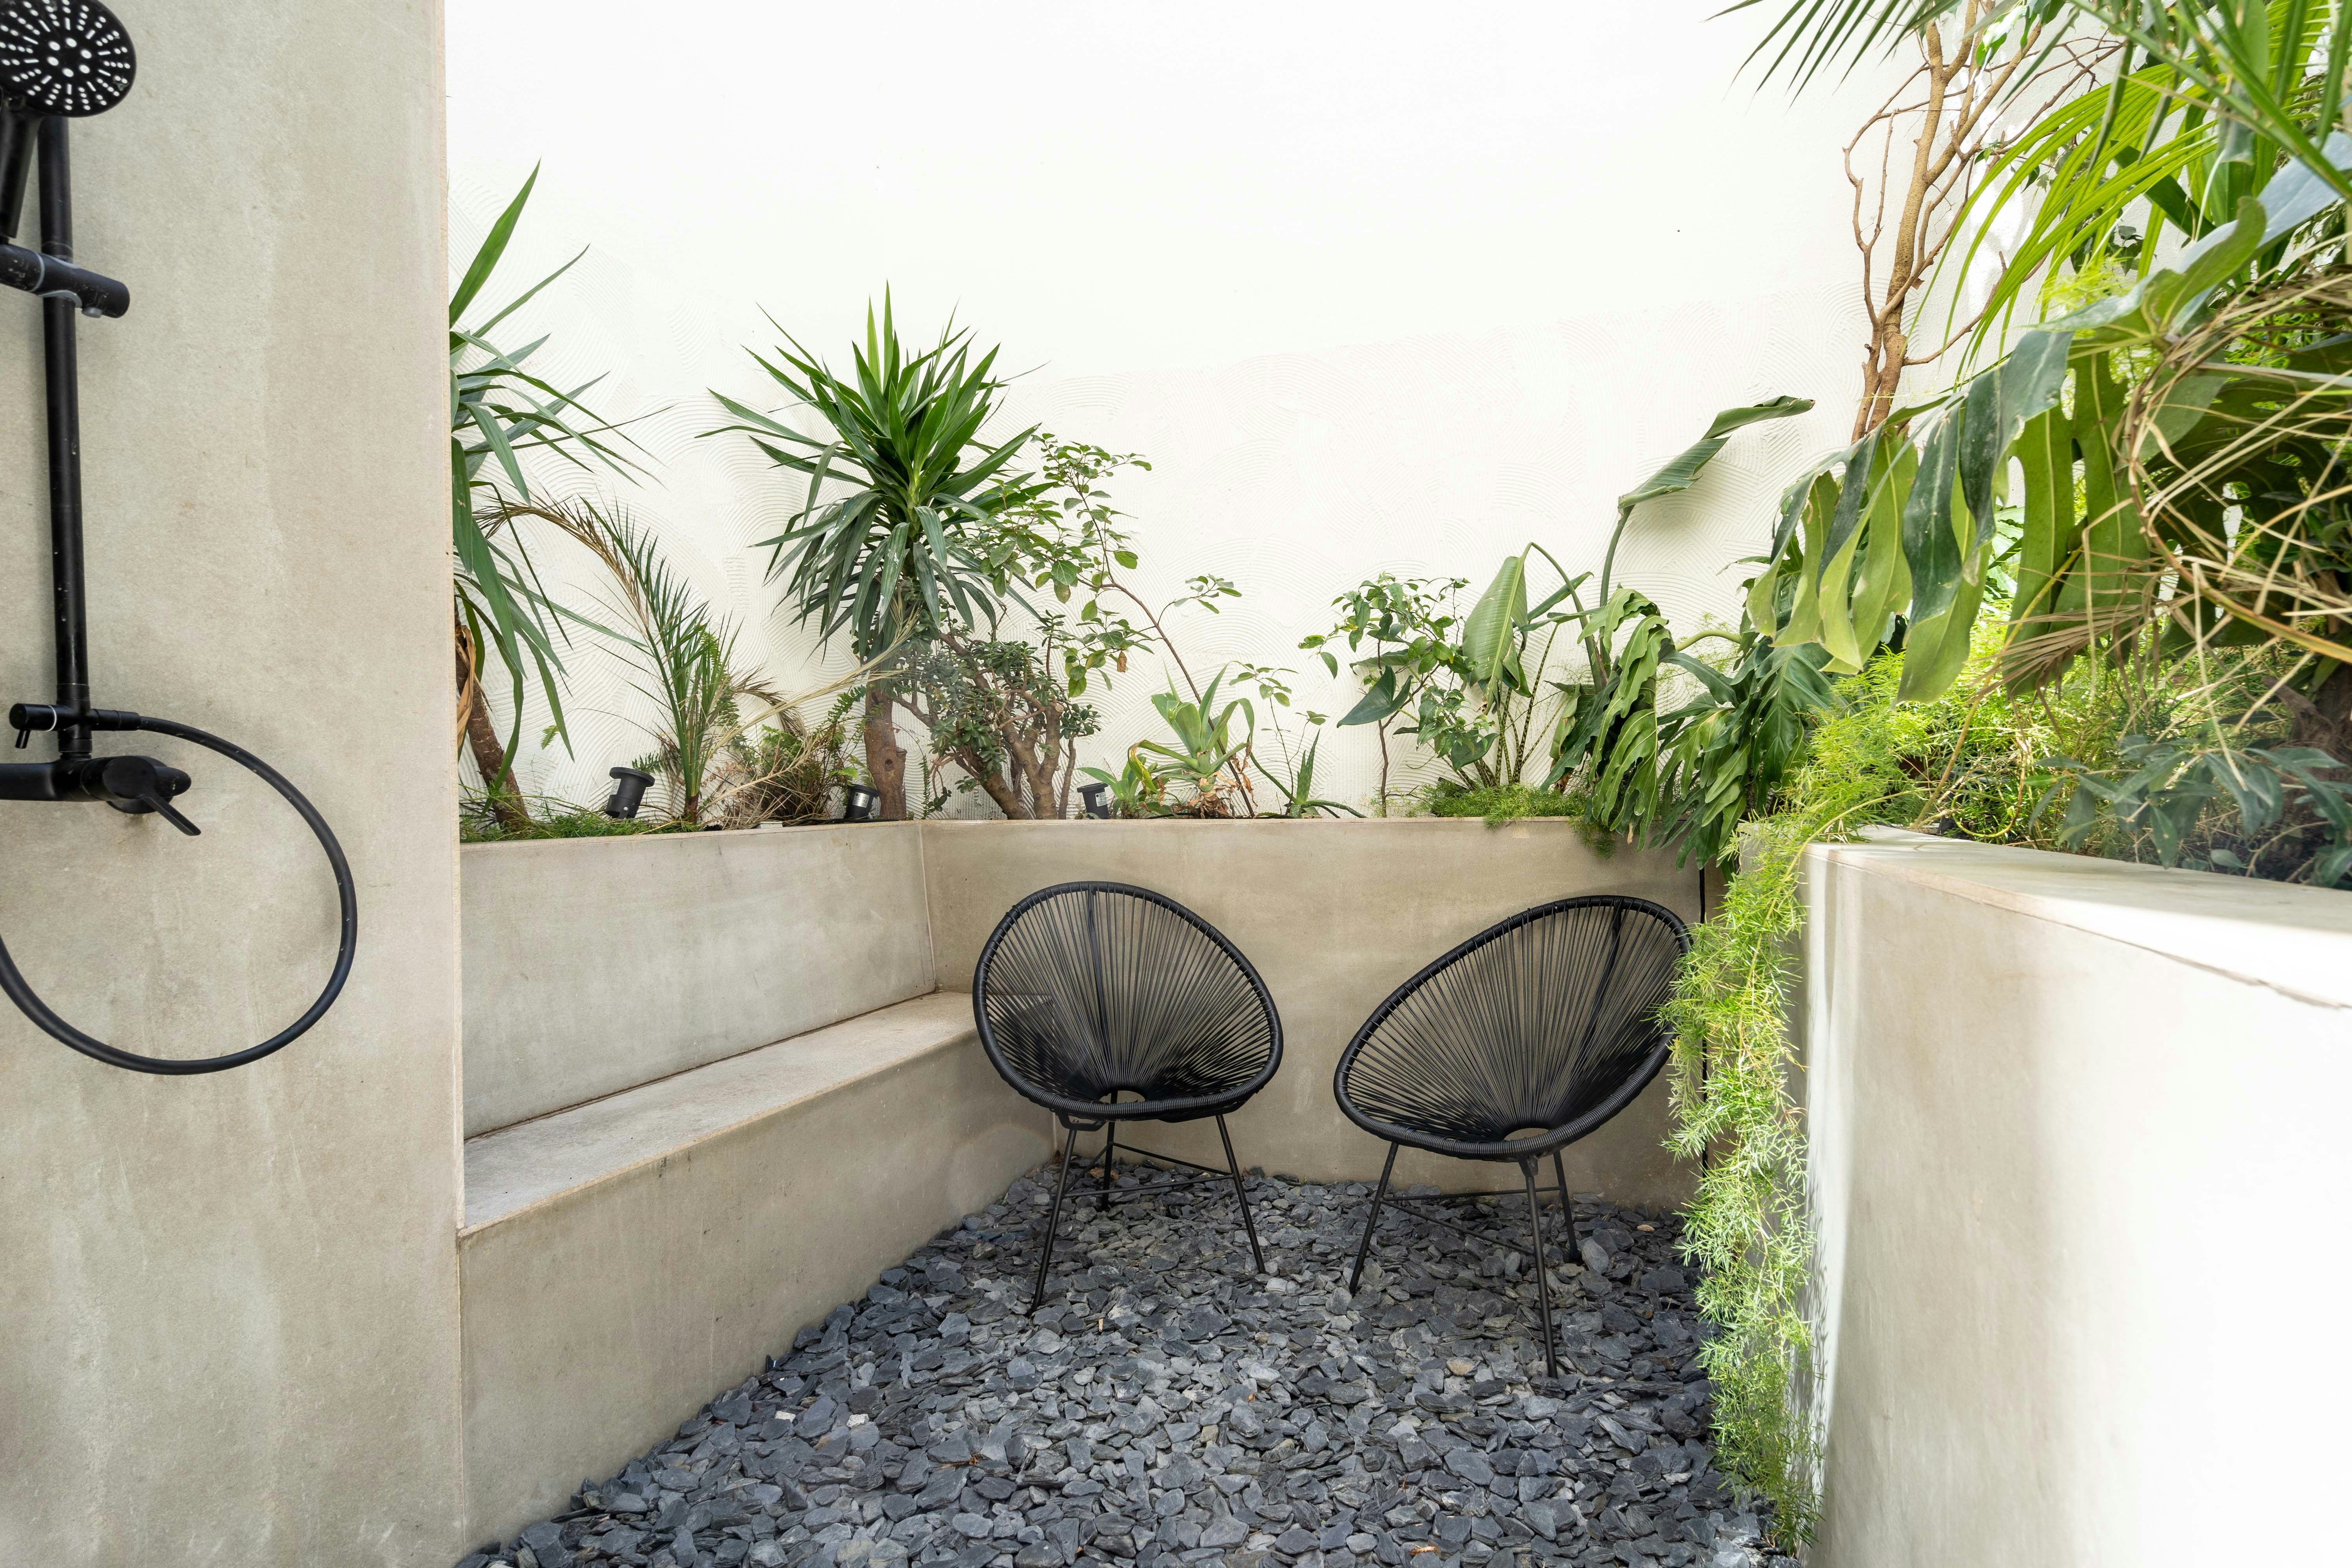 A courtyard garden with two chairs and plants surrounding it